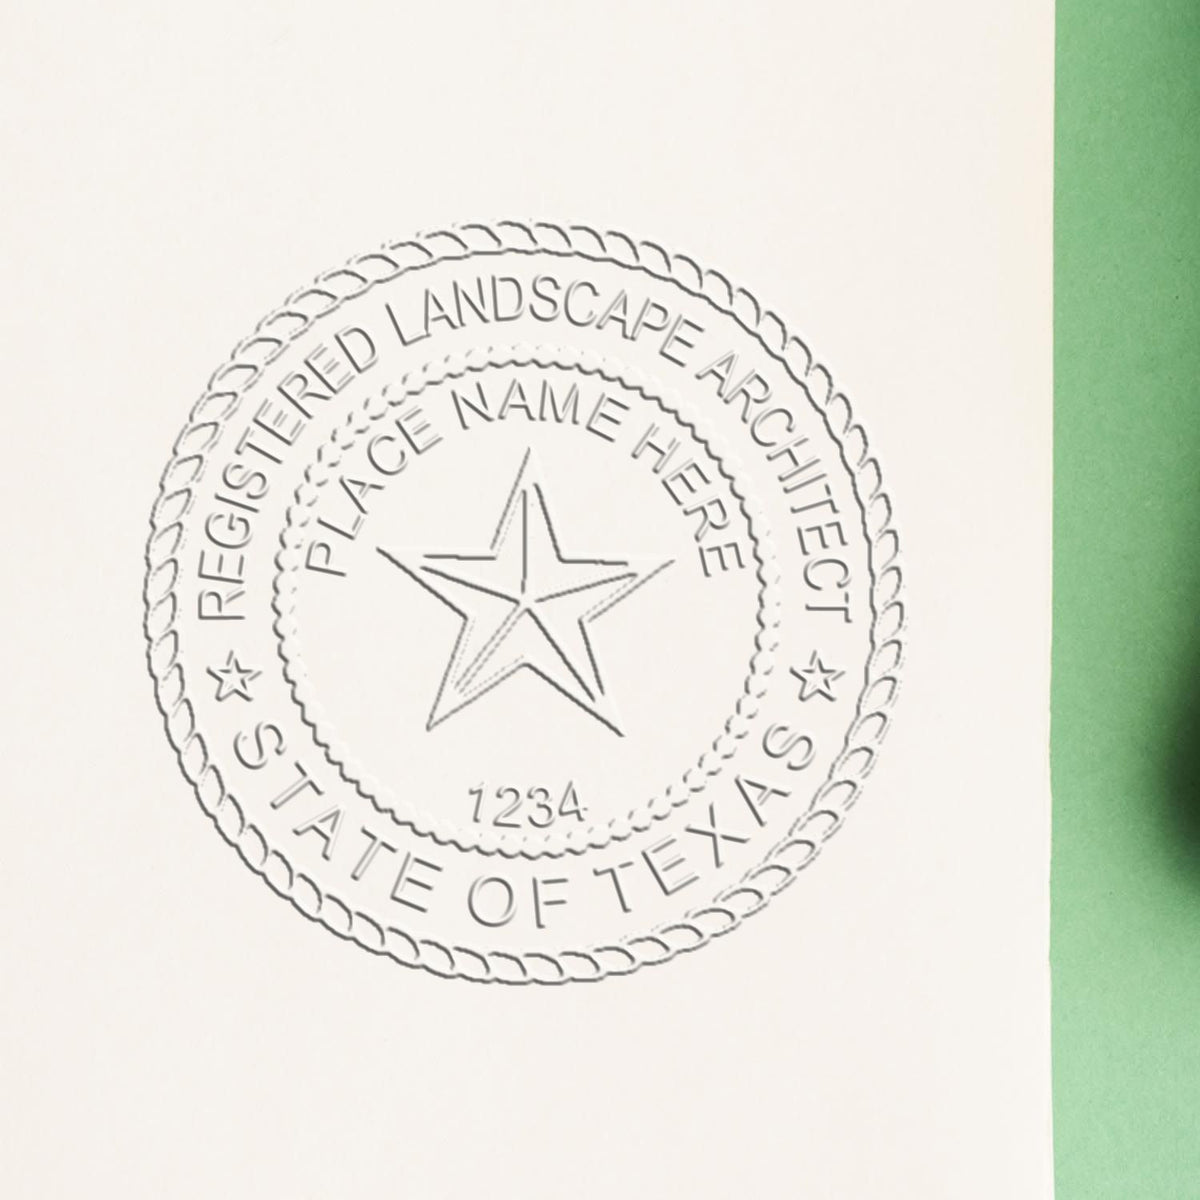 The Gift Texas Landscape Architect Seal stamp impression comes to life with a crisp, detailed image stamped on paper - showcasing true professional quality.